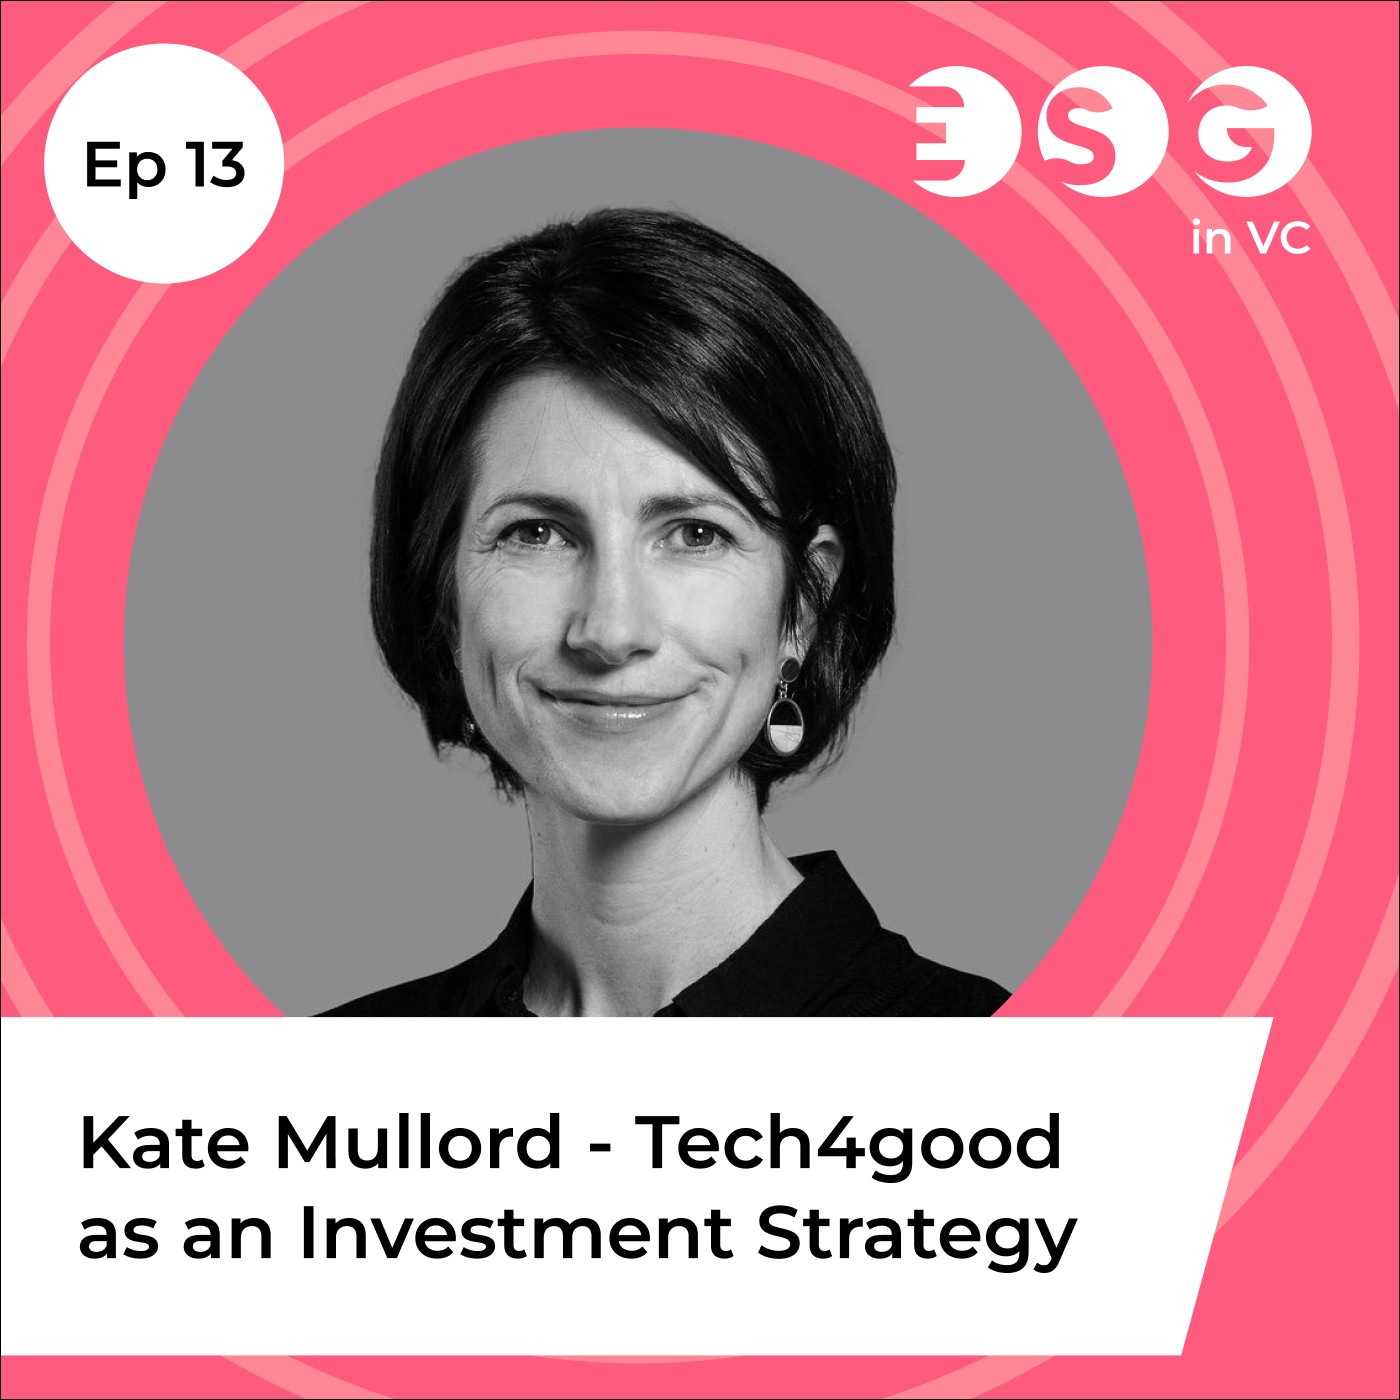 Ep 13 - Kate Mullord - Tech4good as Investment Strategy